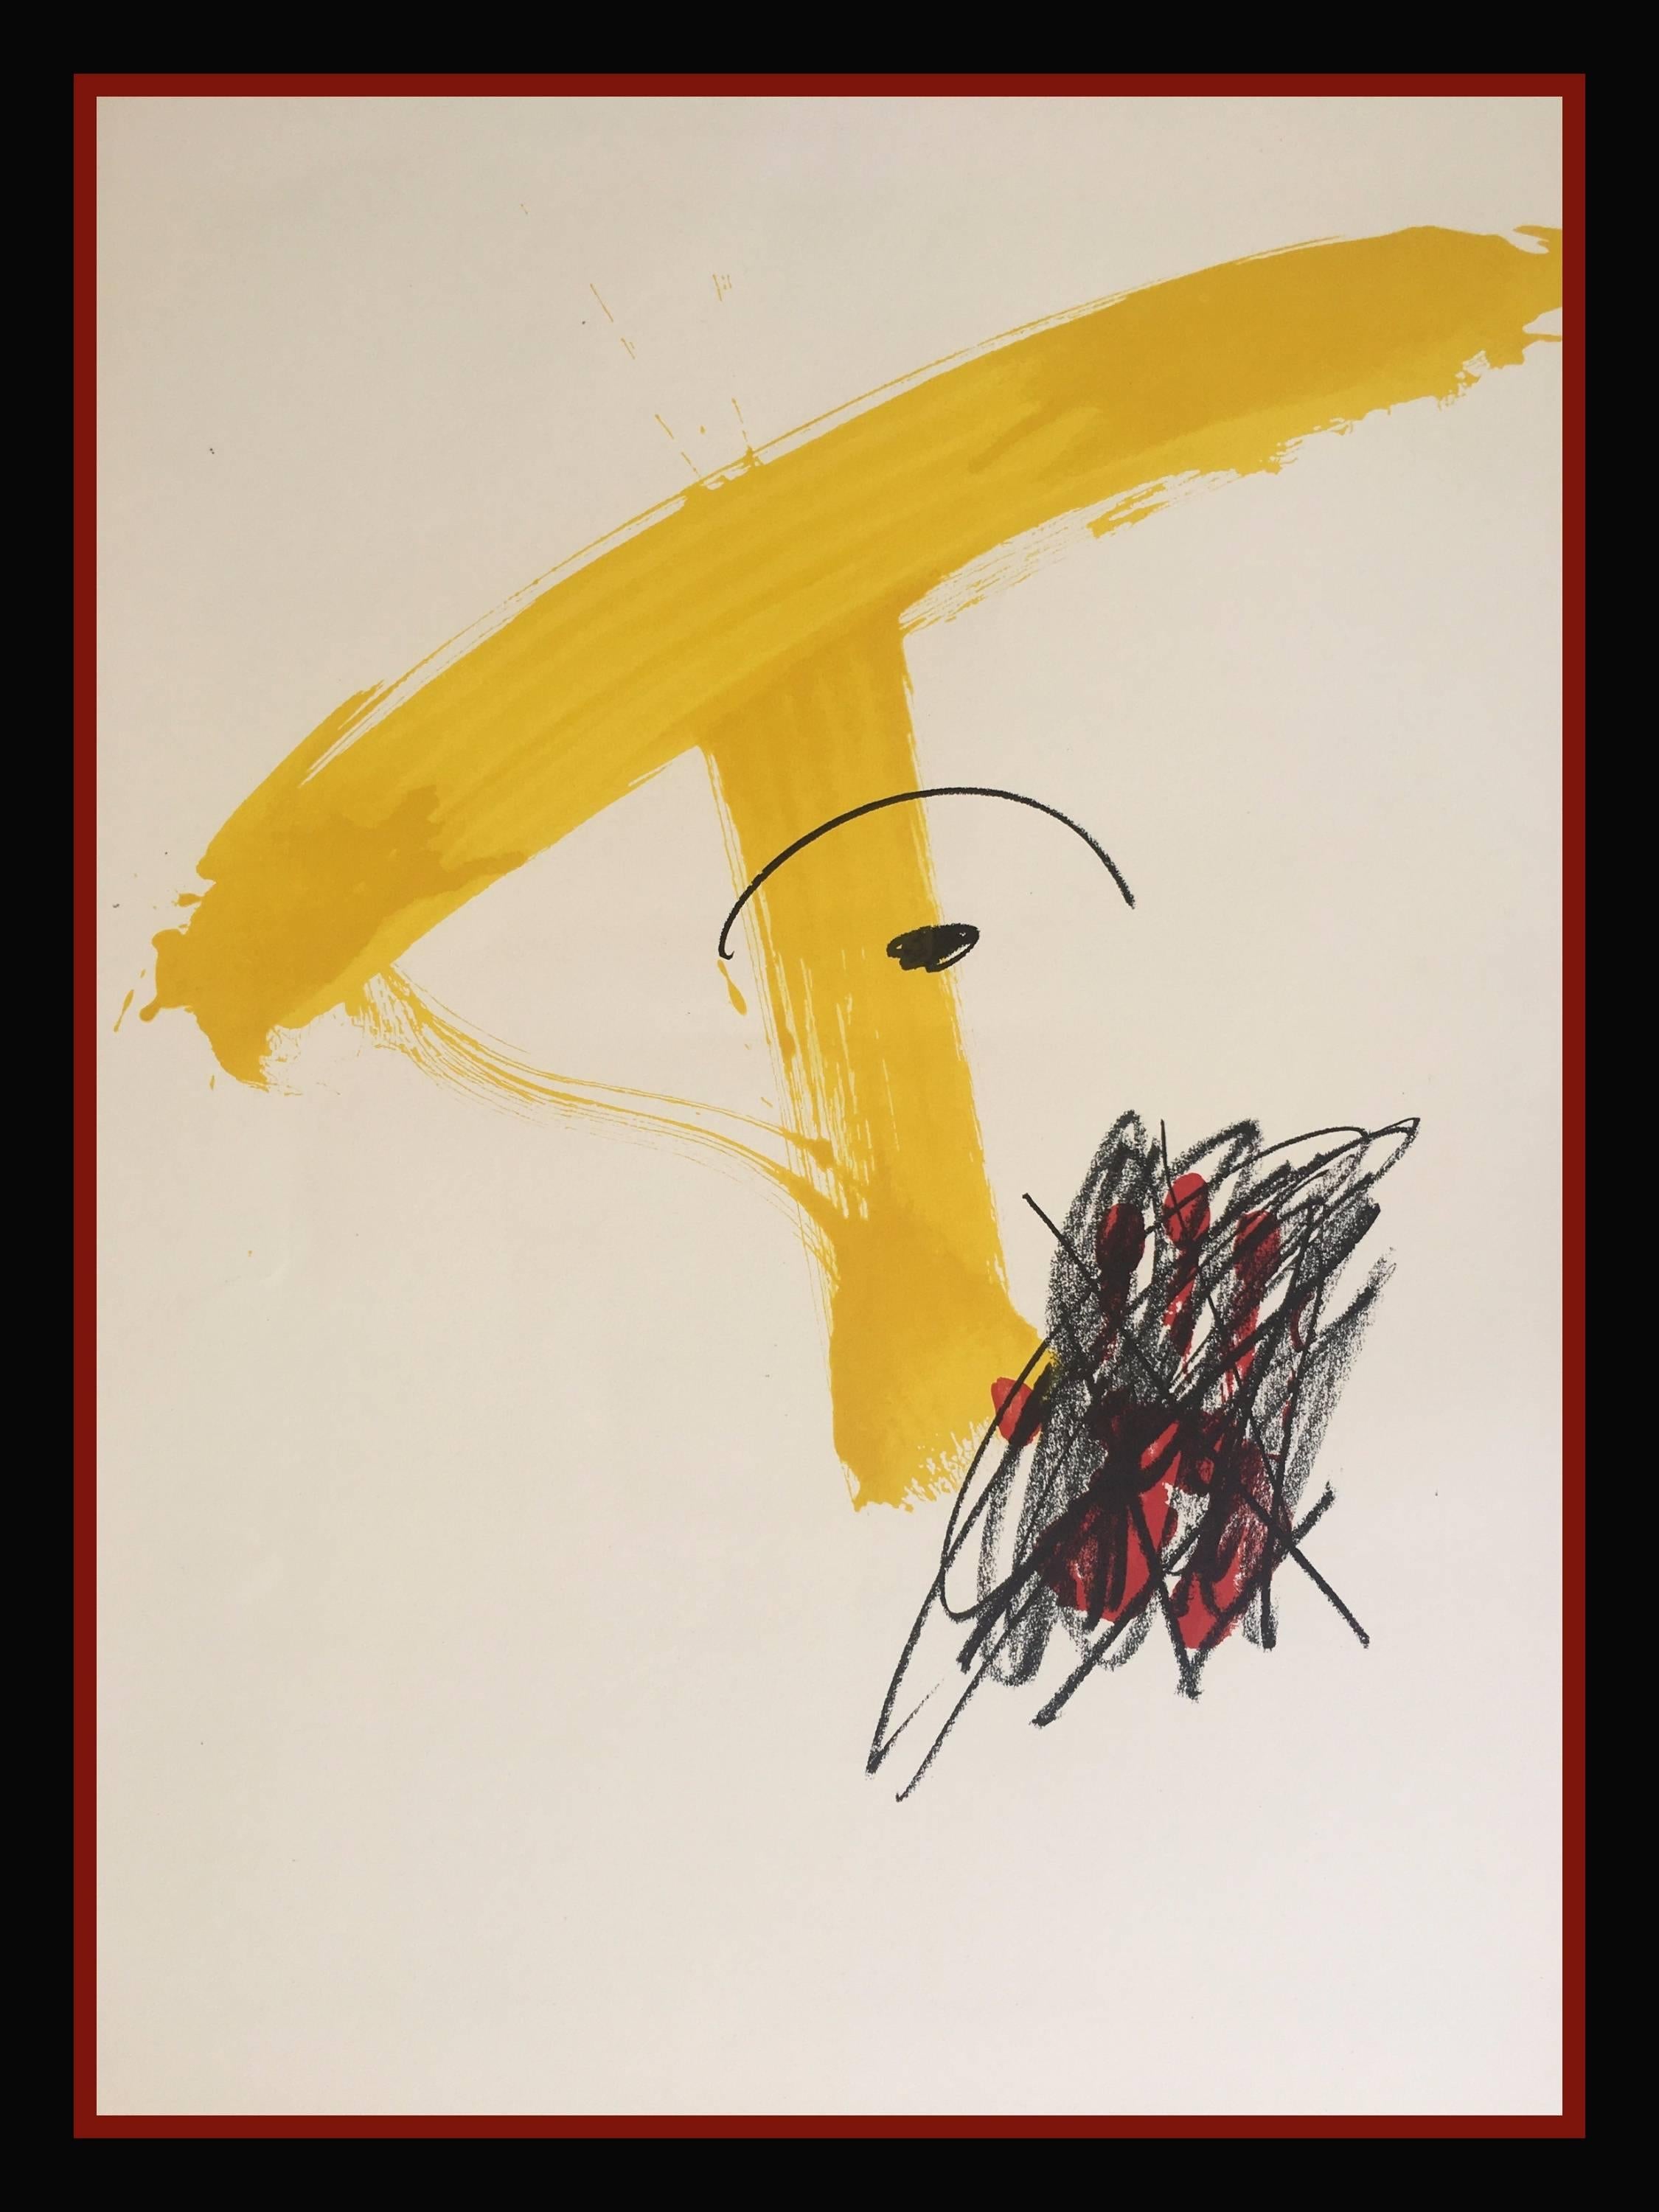 Antoni Tàpies Abstract Print - Tapies  Black  Yellow  Vertical. 1974 original lithography painting